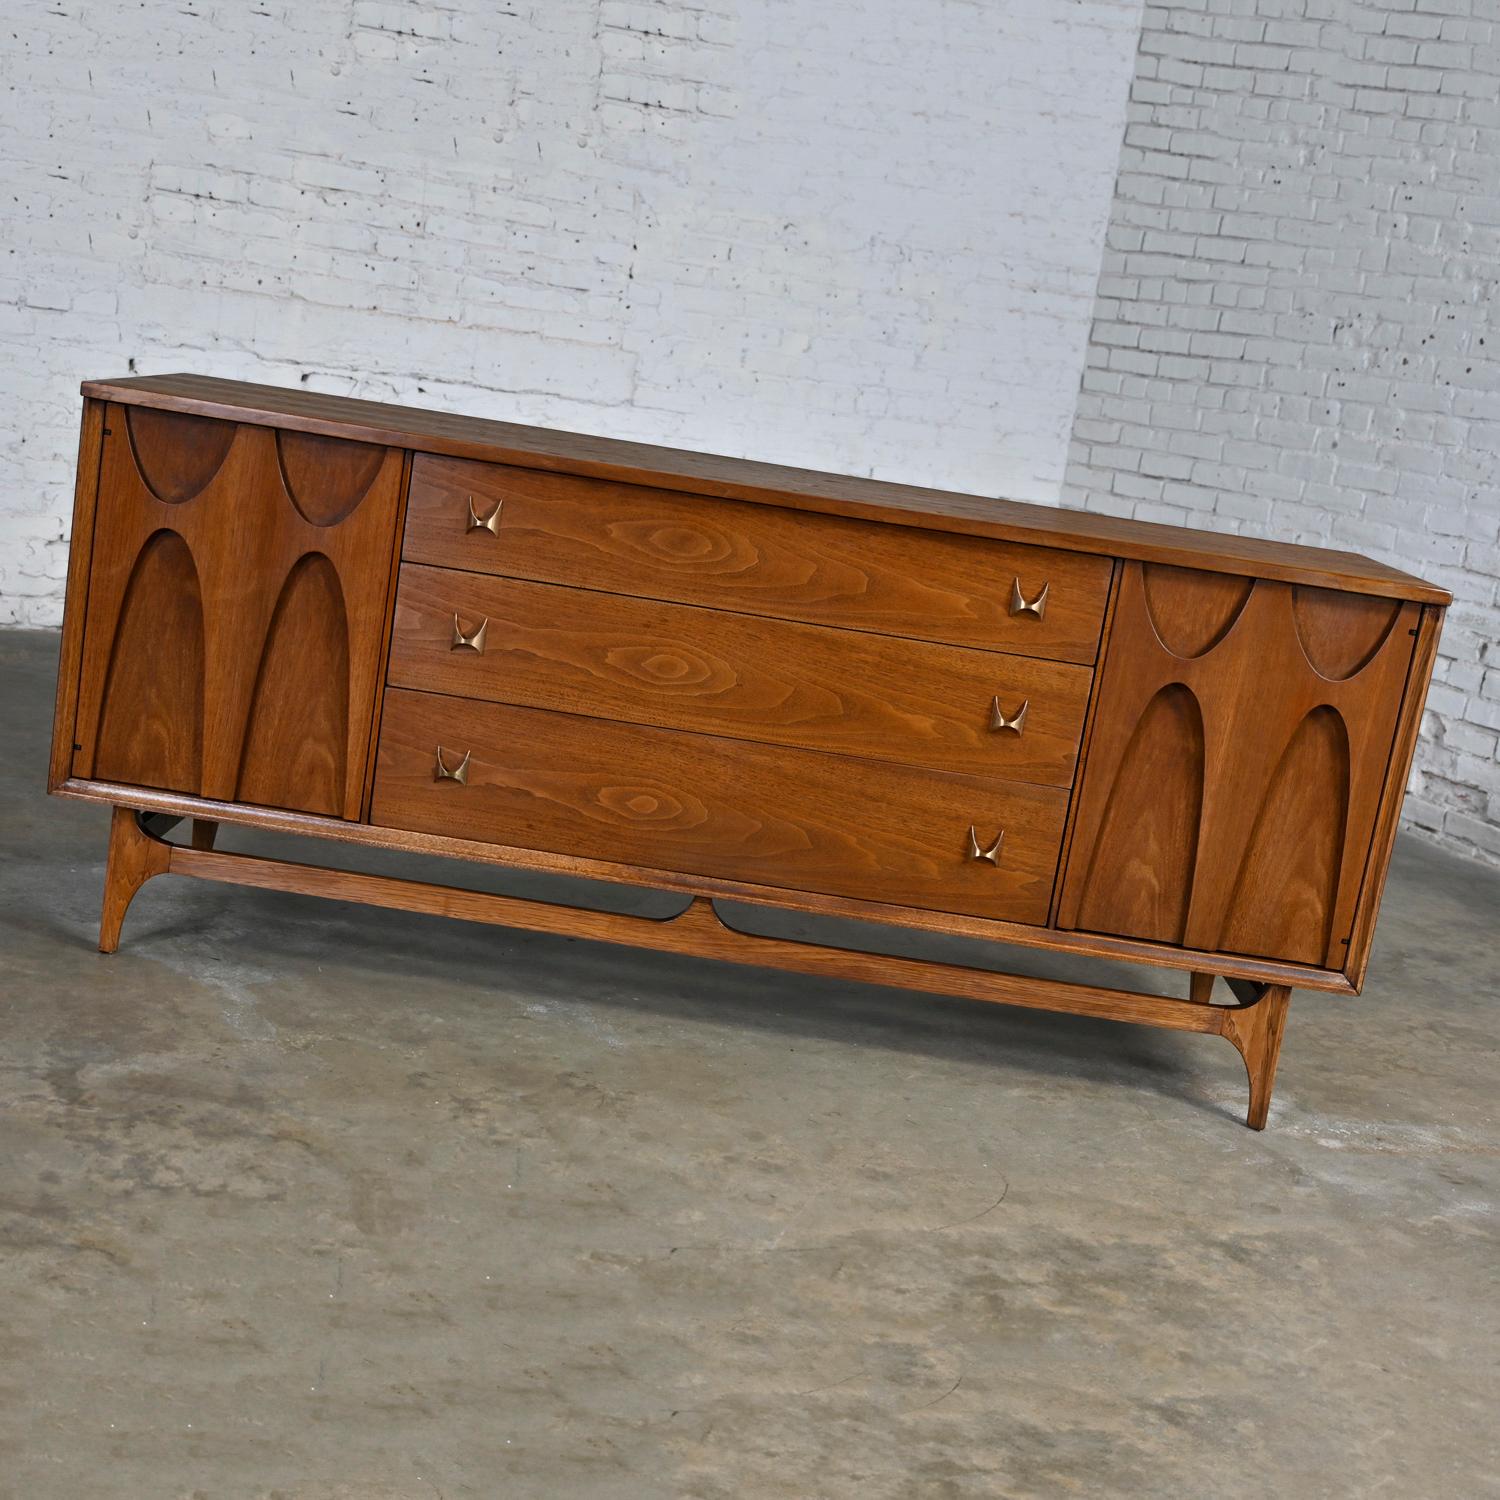 Handsome Mid-Century Modern Brutalist Brasilia dresser #6130-33 Broyhill Premier Series comprised of walnut and brass hardware. Beautiful condition, keeping in mind that this is vintage and not new so will have signs of use and wear. This piece has